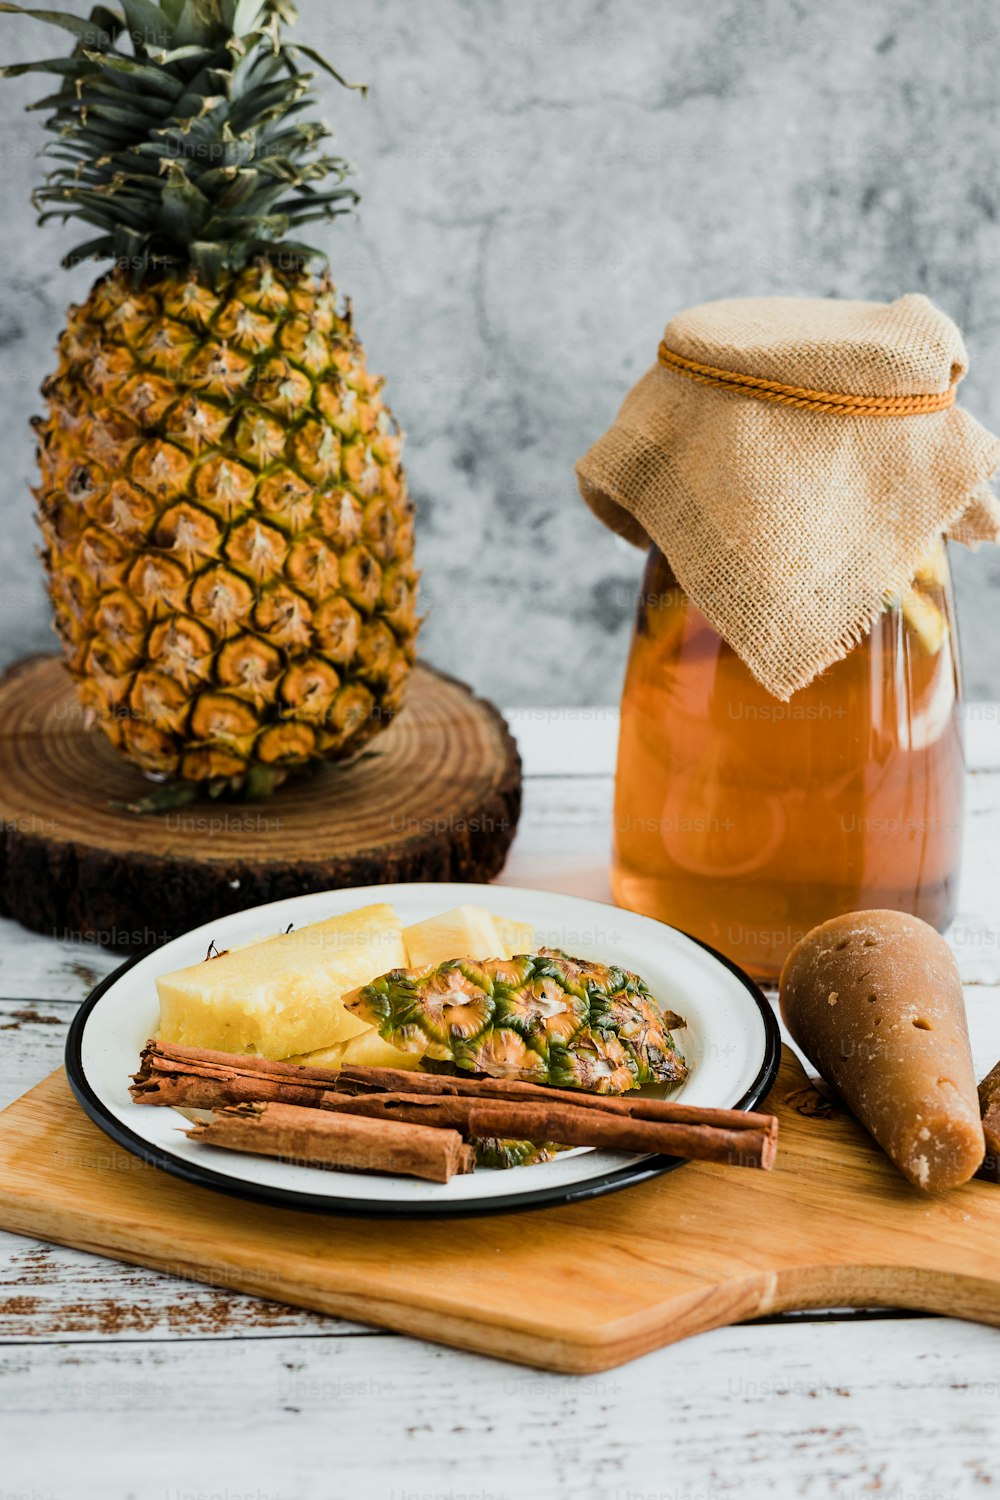 ingredients for Tepache Mexican fermented beverage made with pineapple, panela and cinnamon traditional in Mexico city